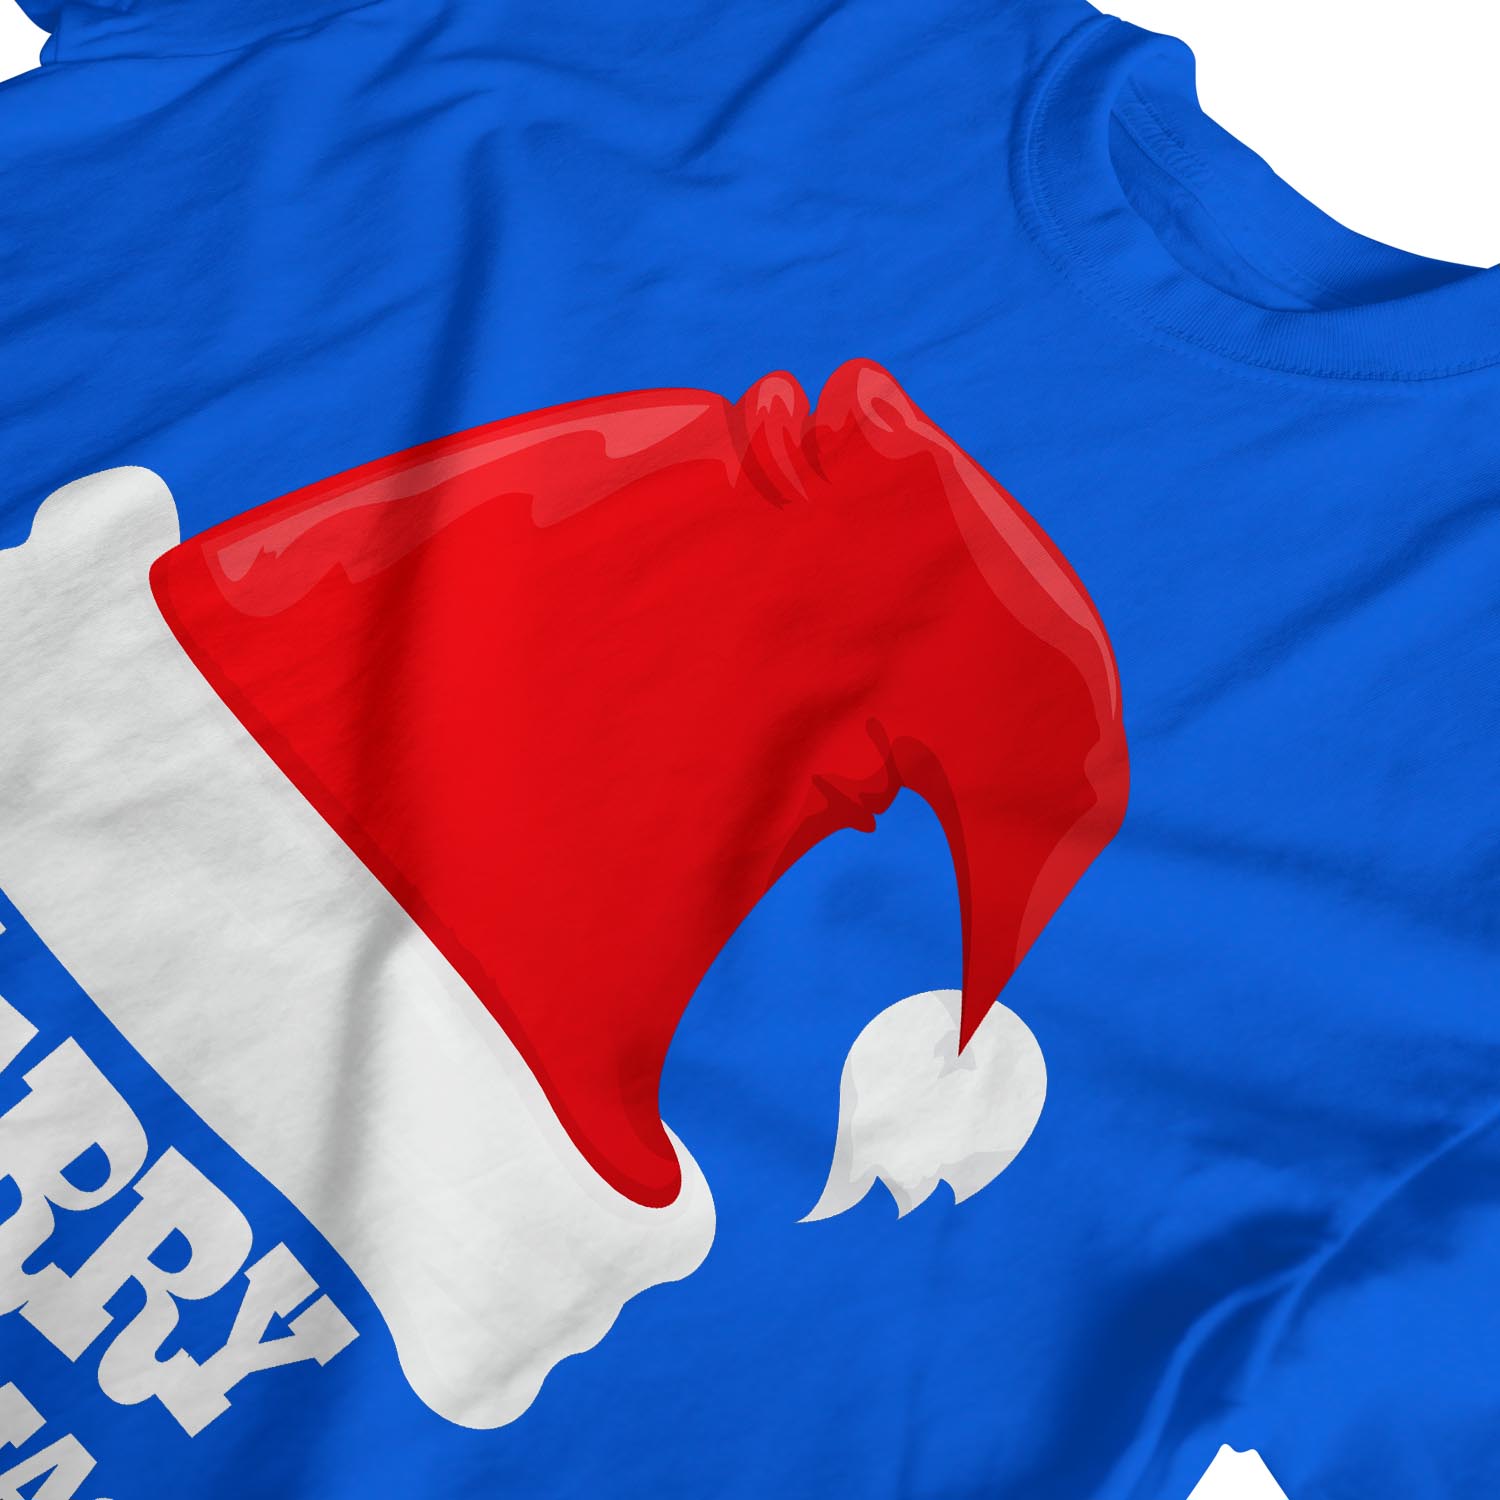 oh christmas tea panda santa hat Classic T-Shirt for Sale by TheSimpleMan